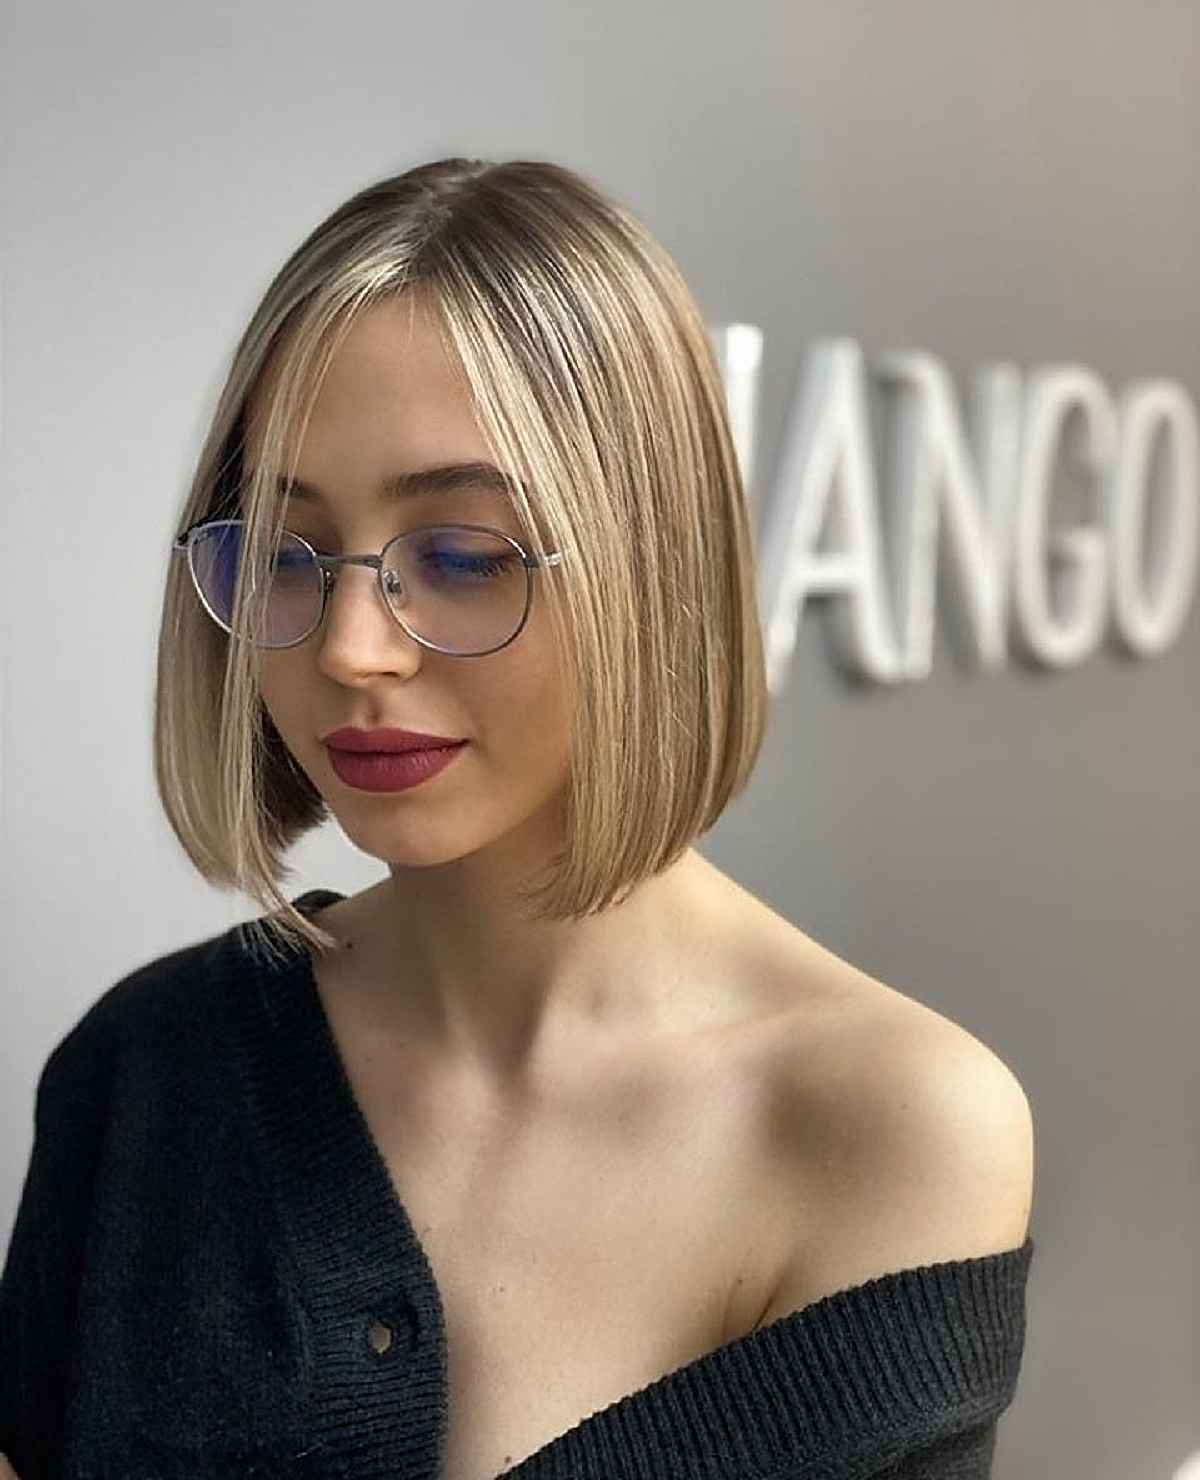 Blonde Bob Hairstyle for Women with Glasses